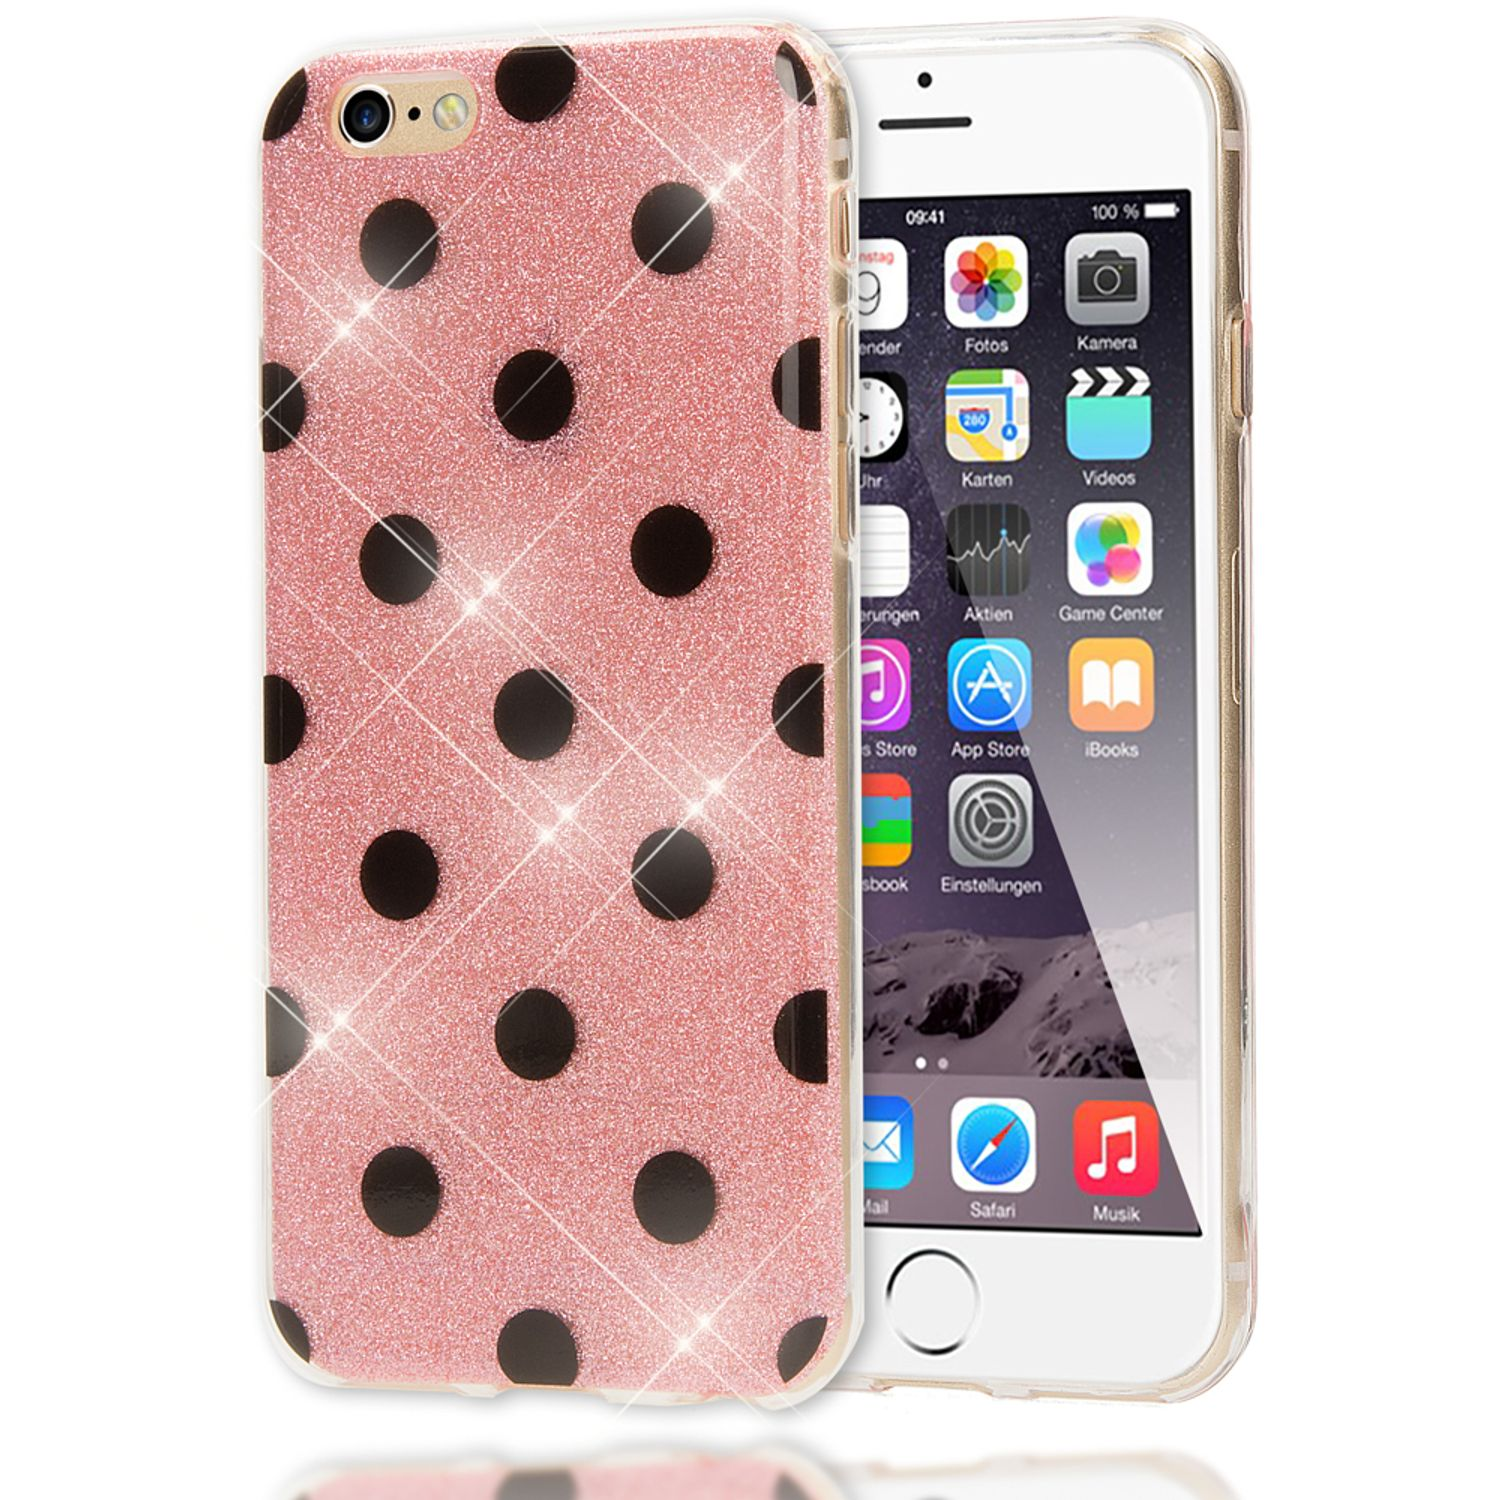 iPhone Hülle, 6s, Backcover, Punkte 6 iPhone NALIA Rosa Apple,